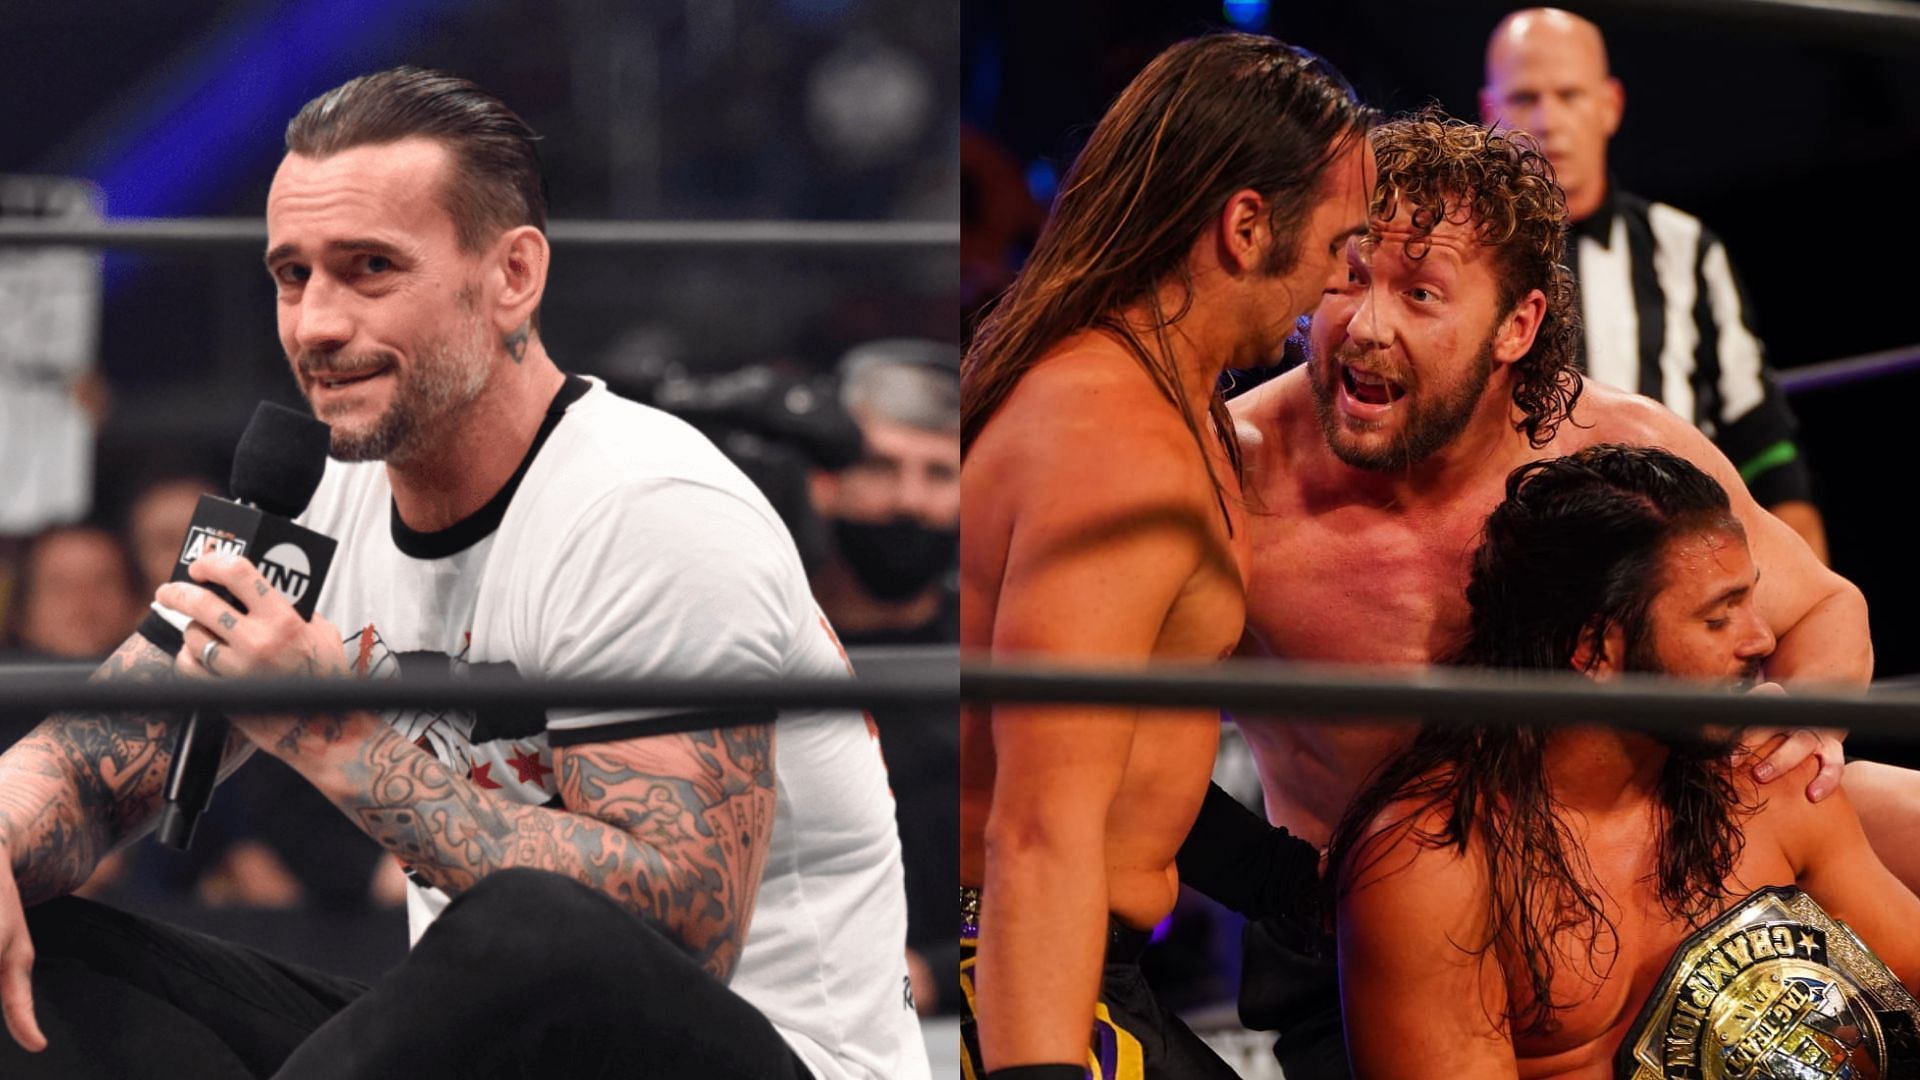 It remains to be seen when CM Punk and The Elite will return to AEW